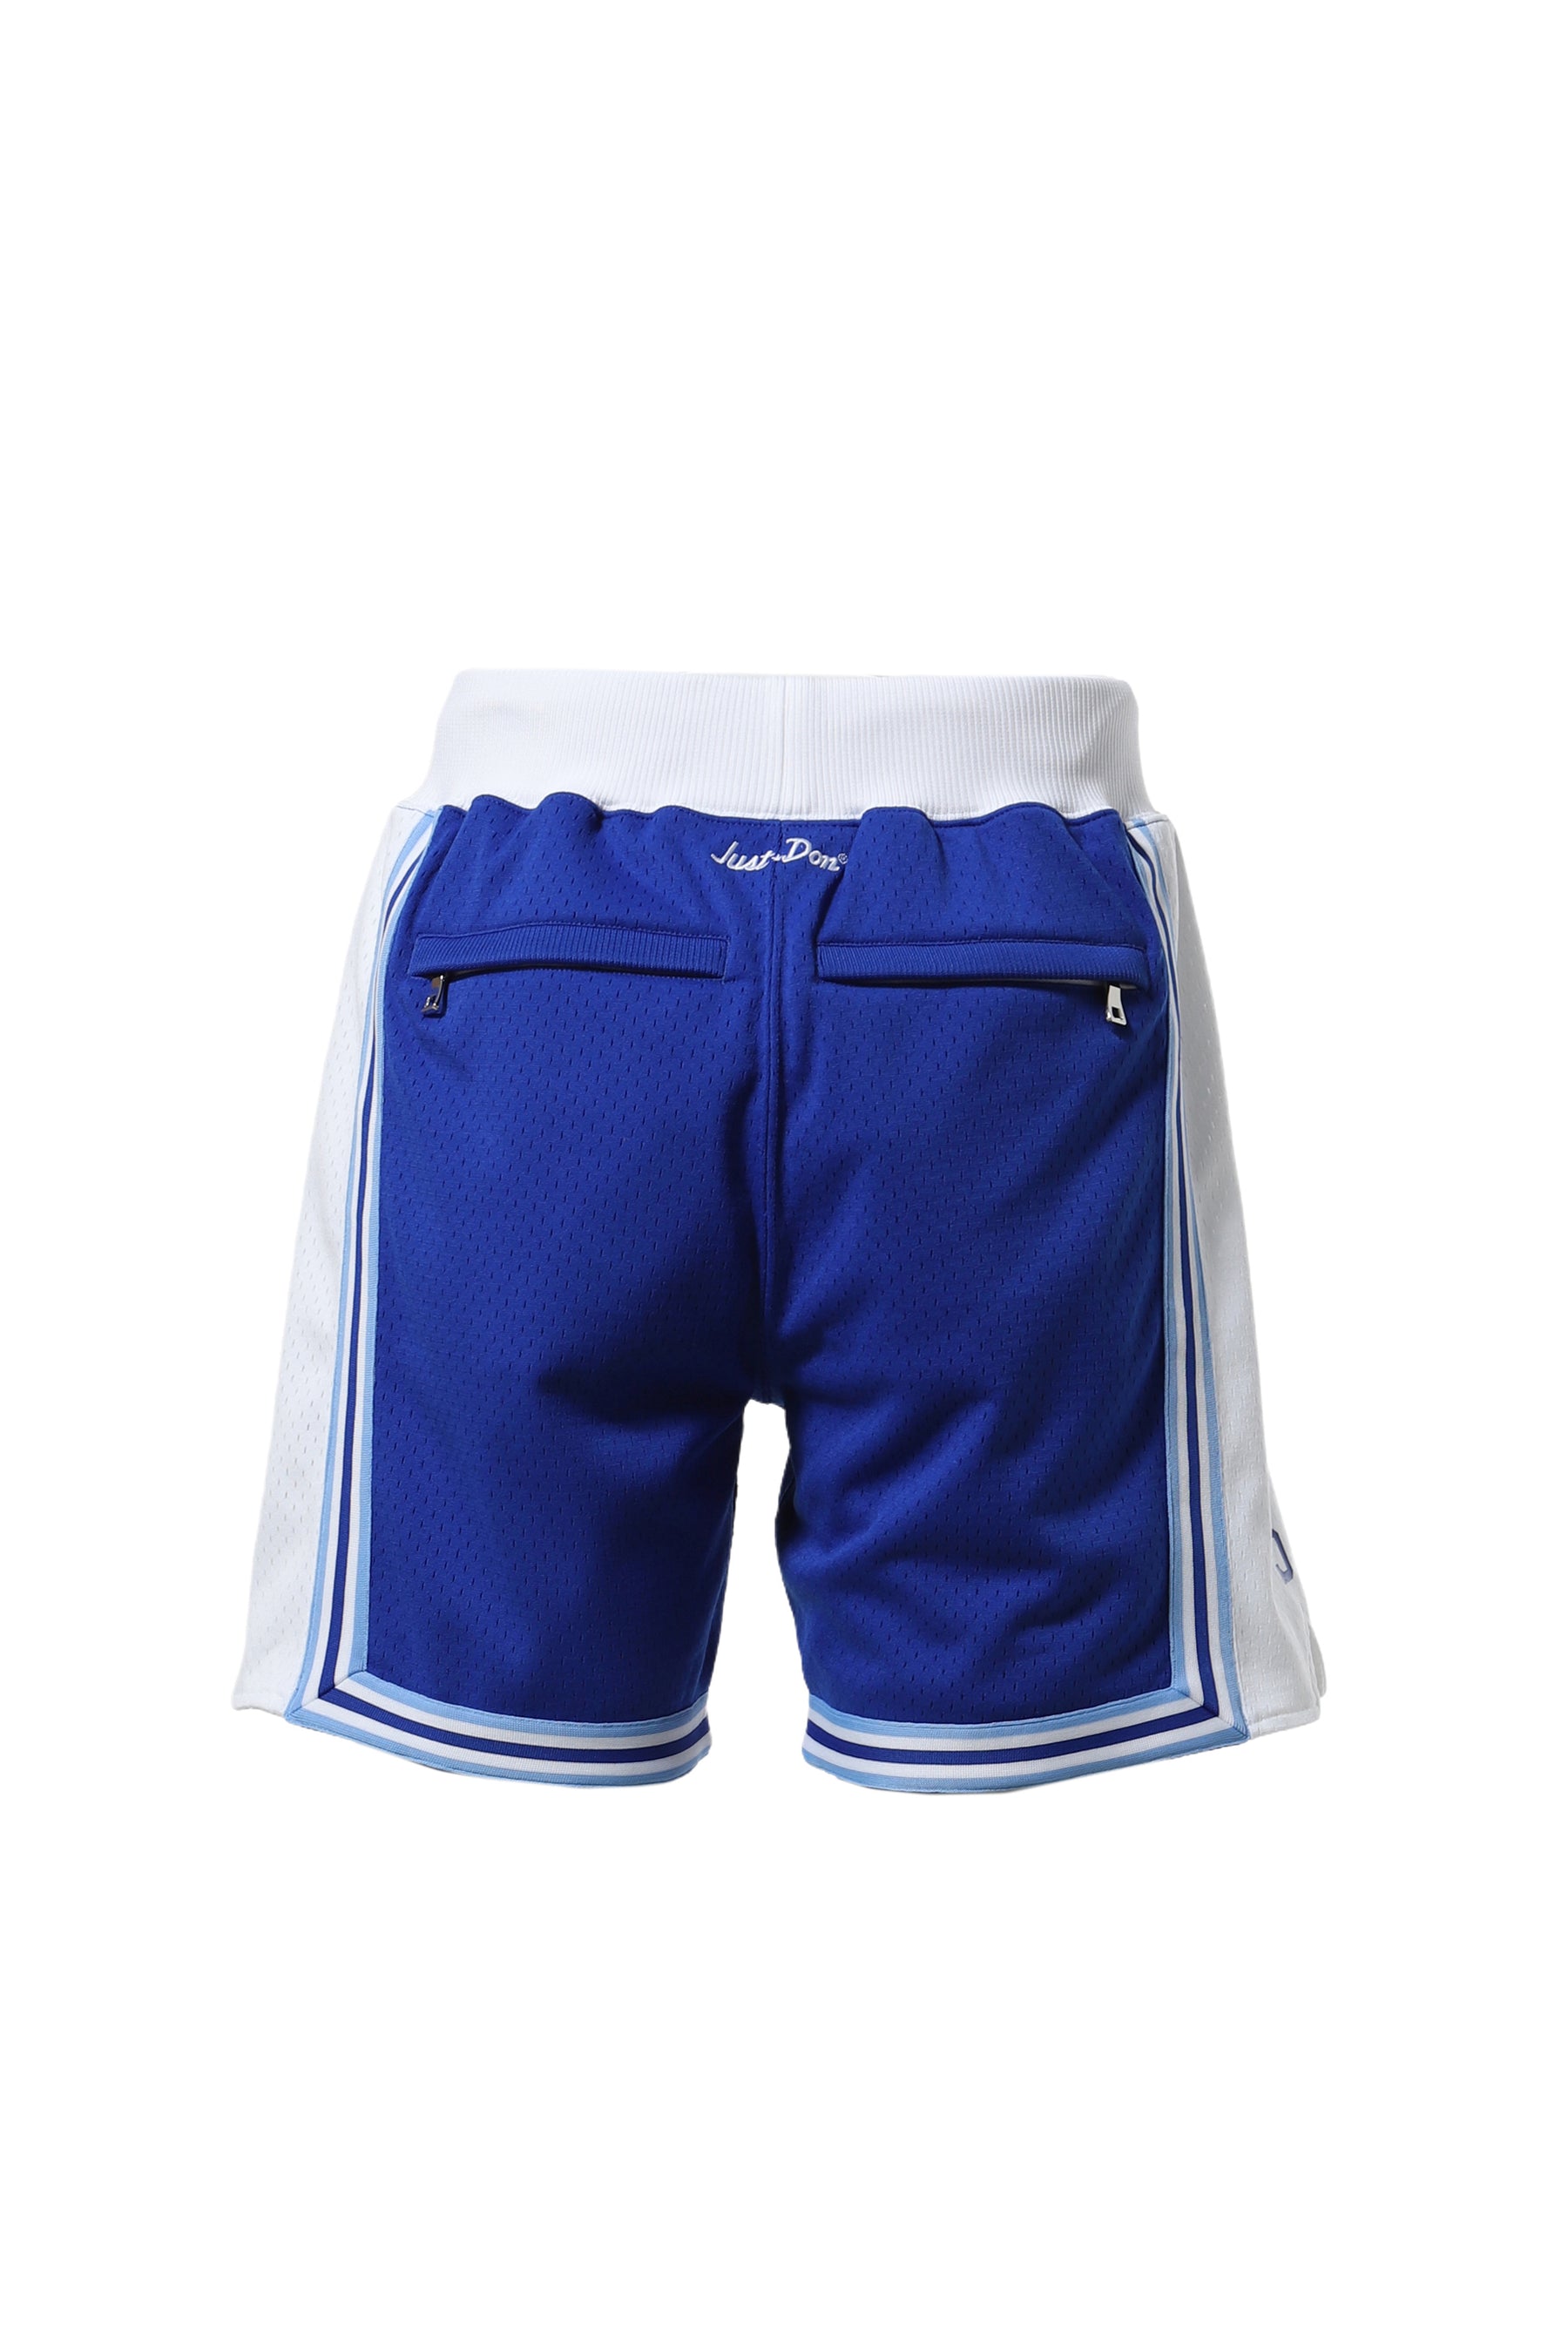 Just Don × Mitchell&Ness SS24 NBA JUST DON BLUE 7 INCH SHORTS LAKERS ...